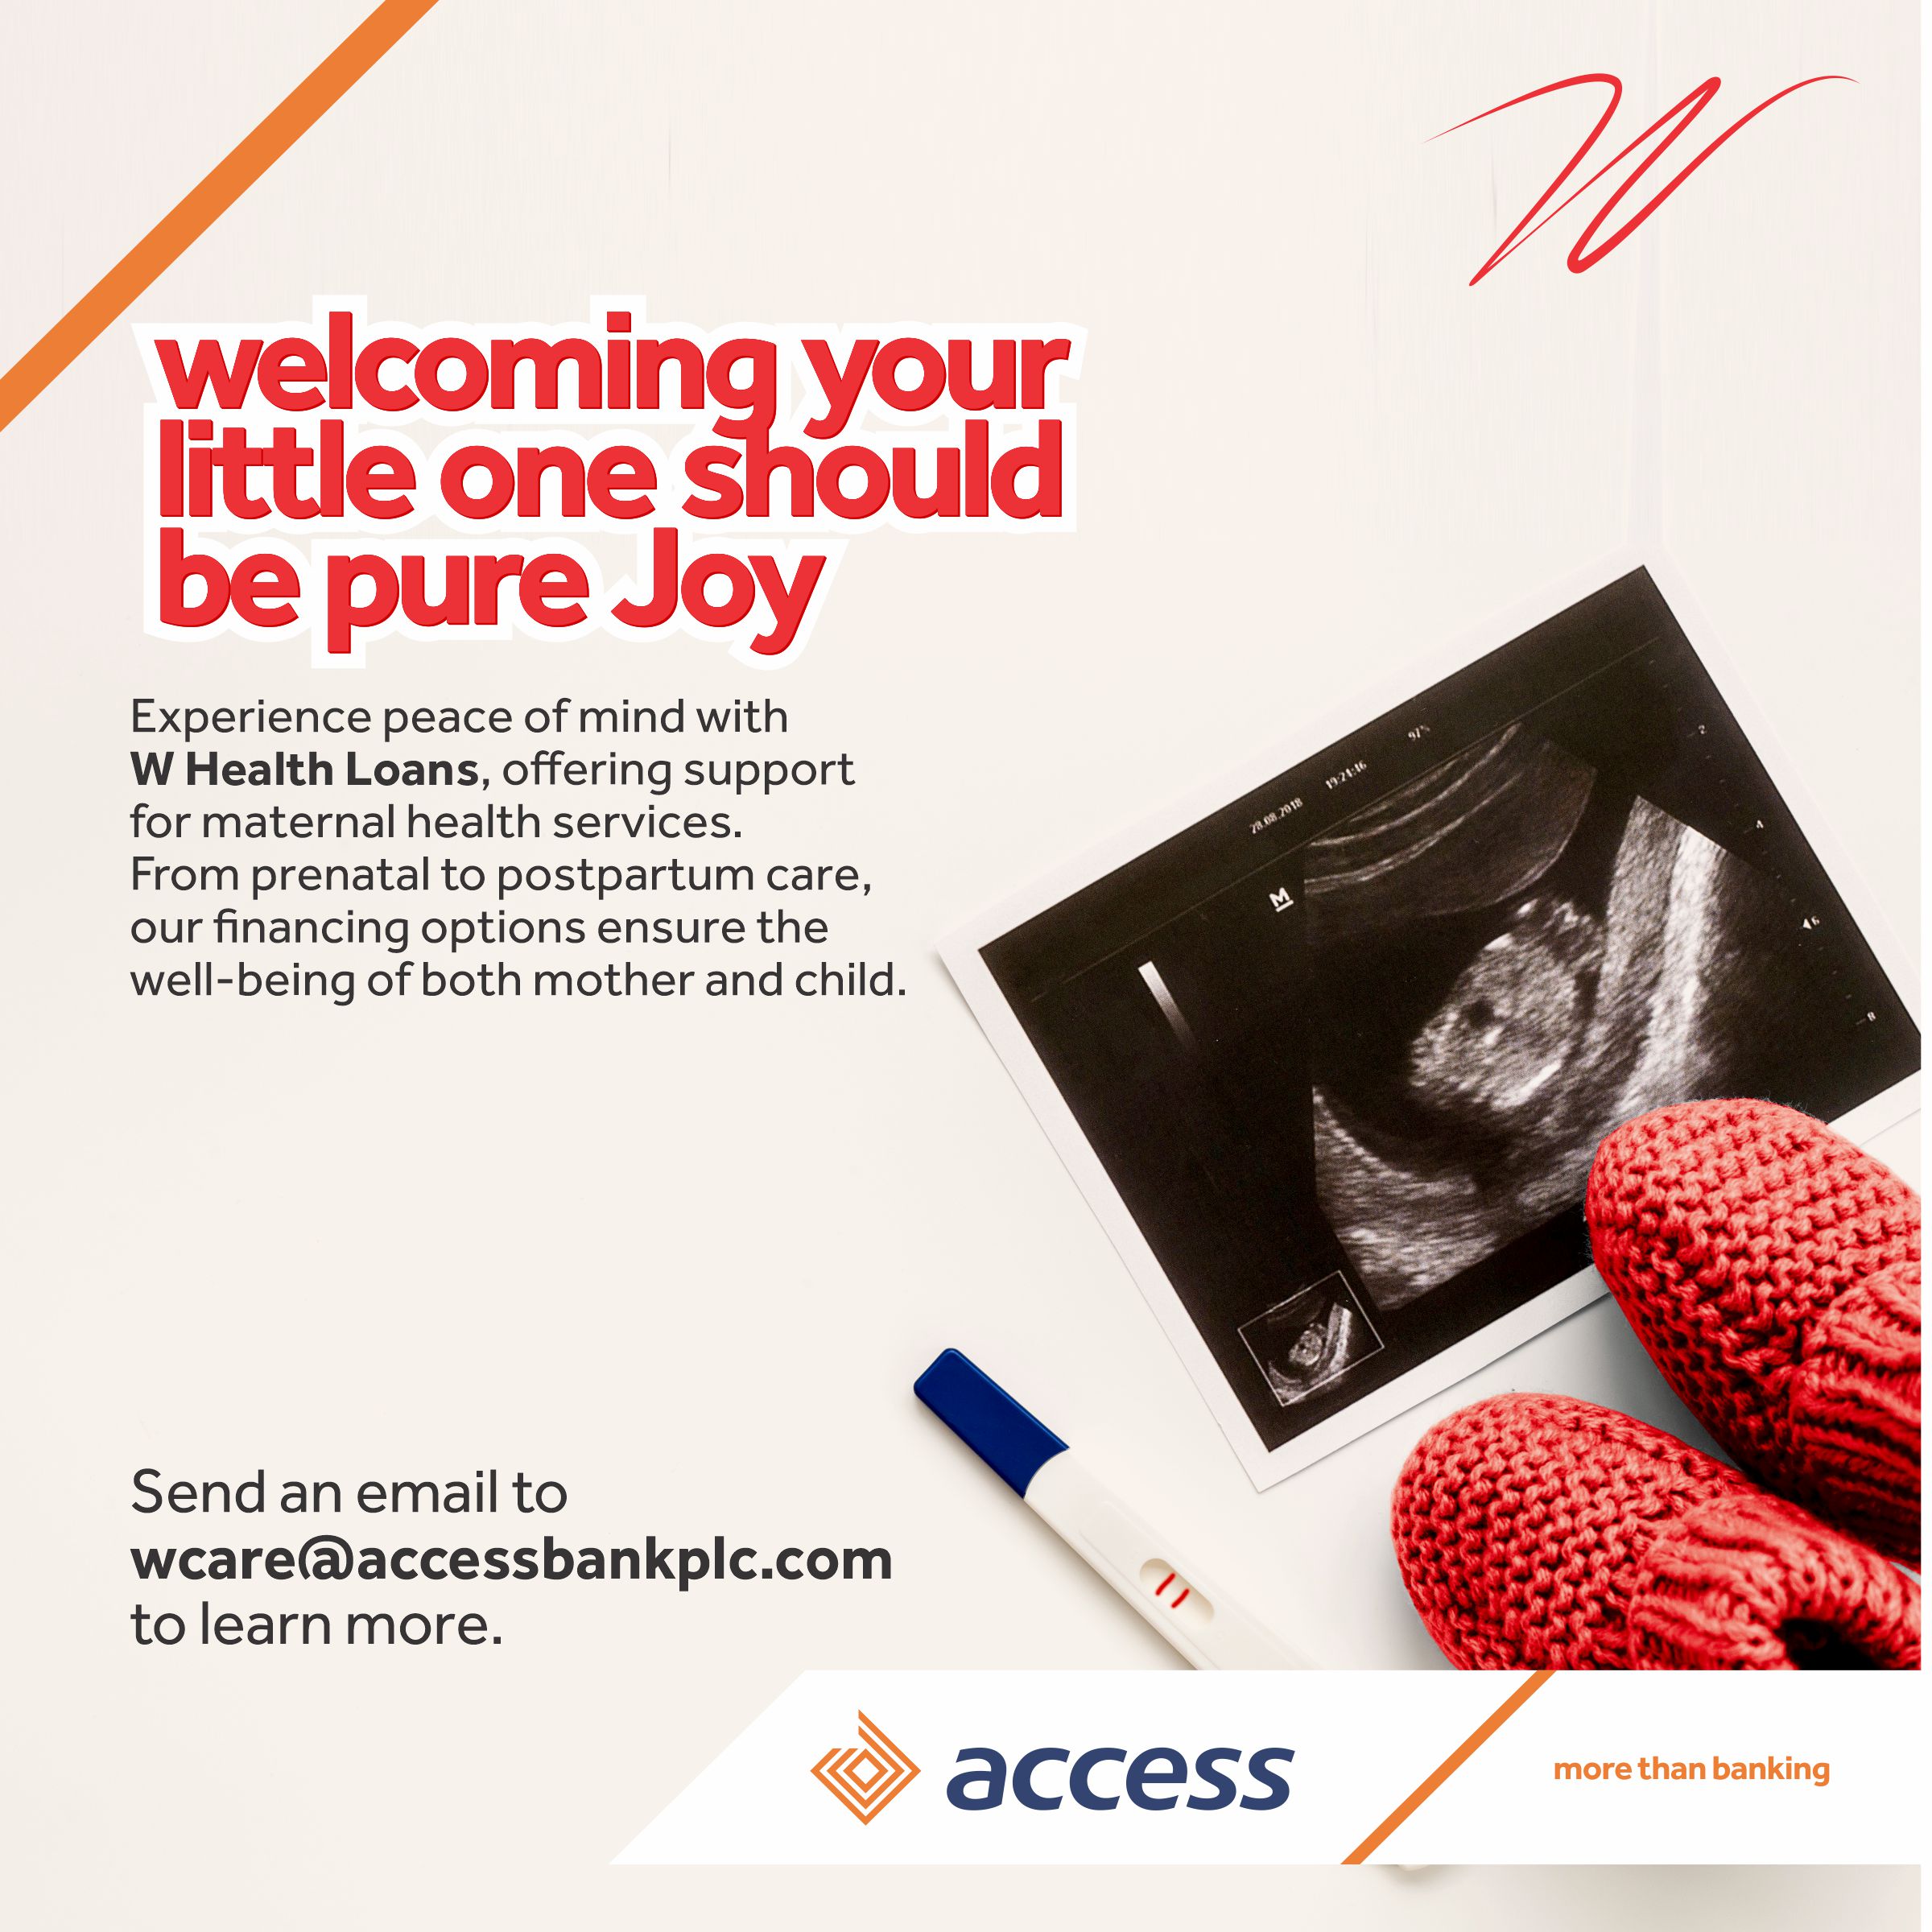 Access Bank Upgrades its W Health Loan Offering to Empower Women